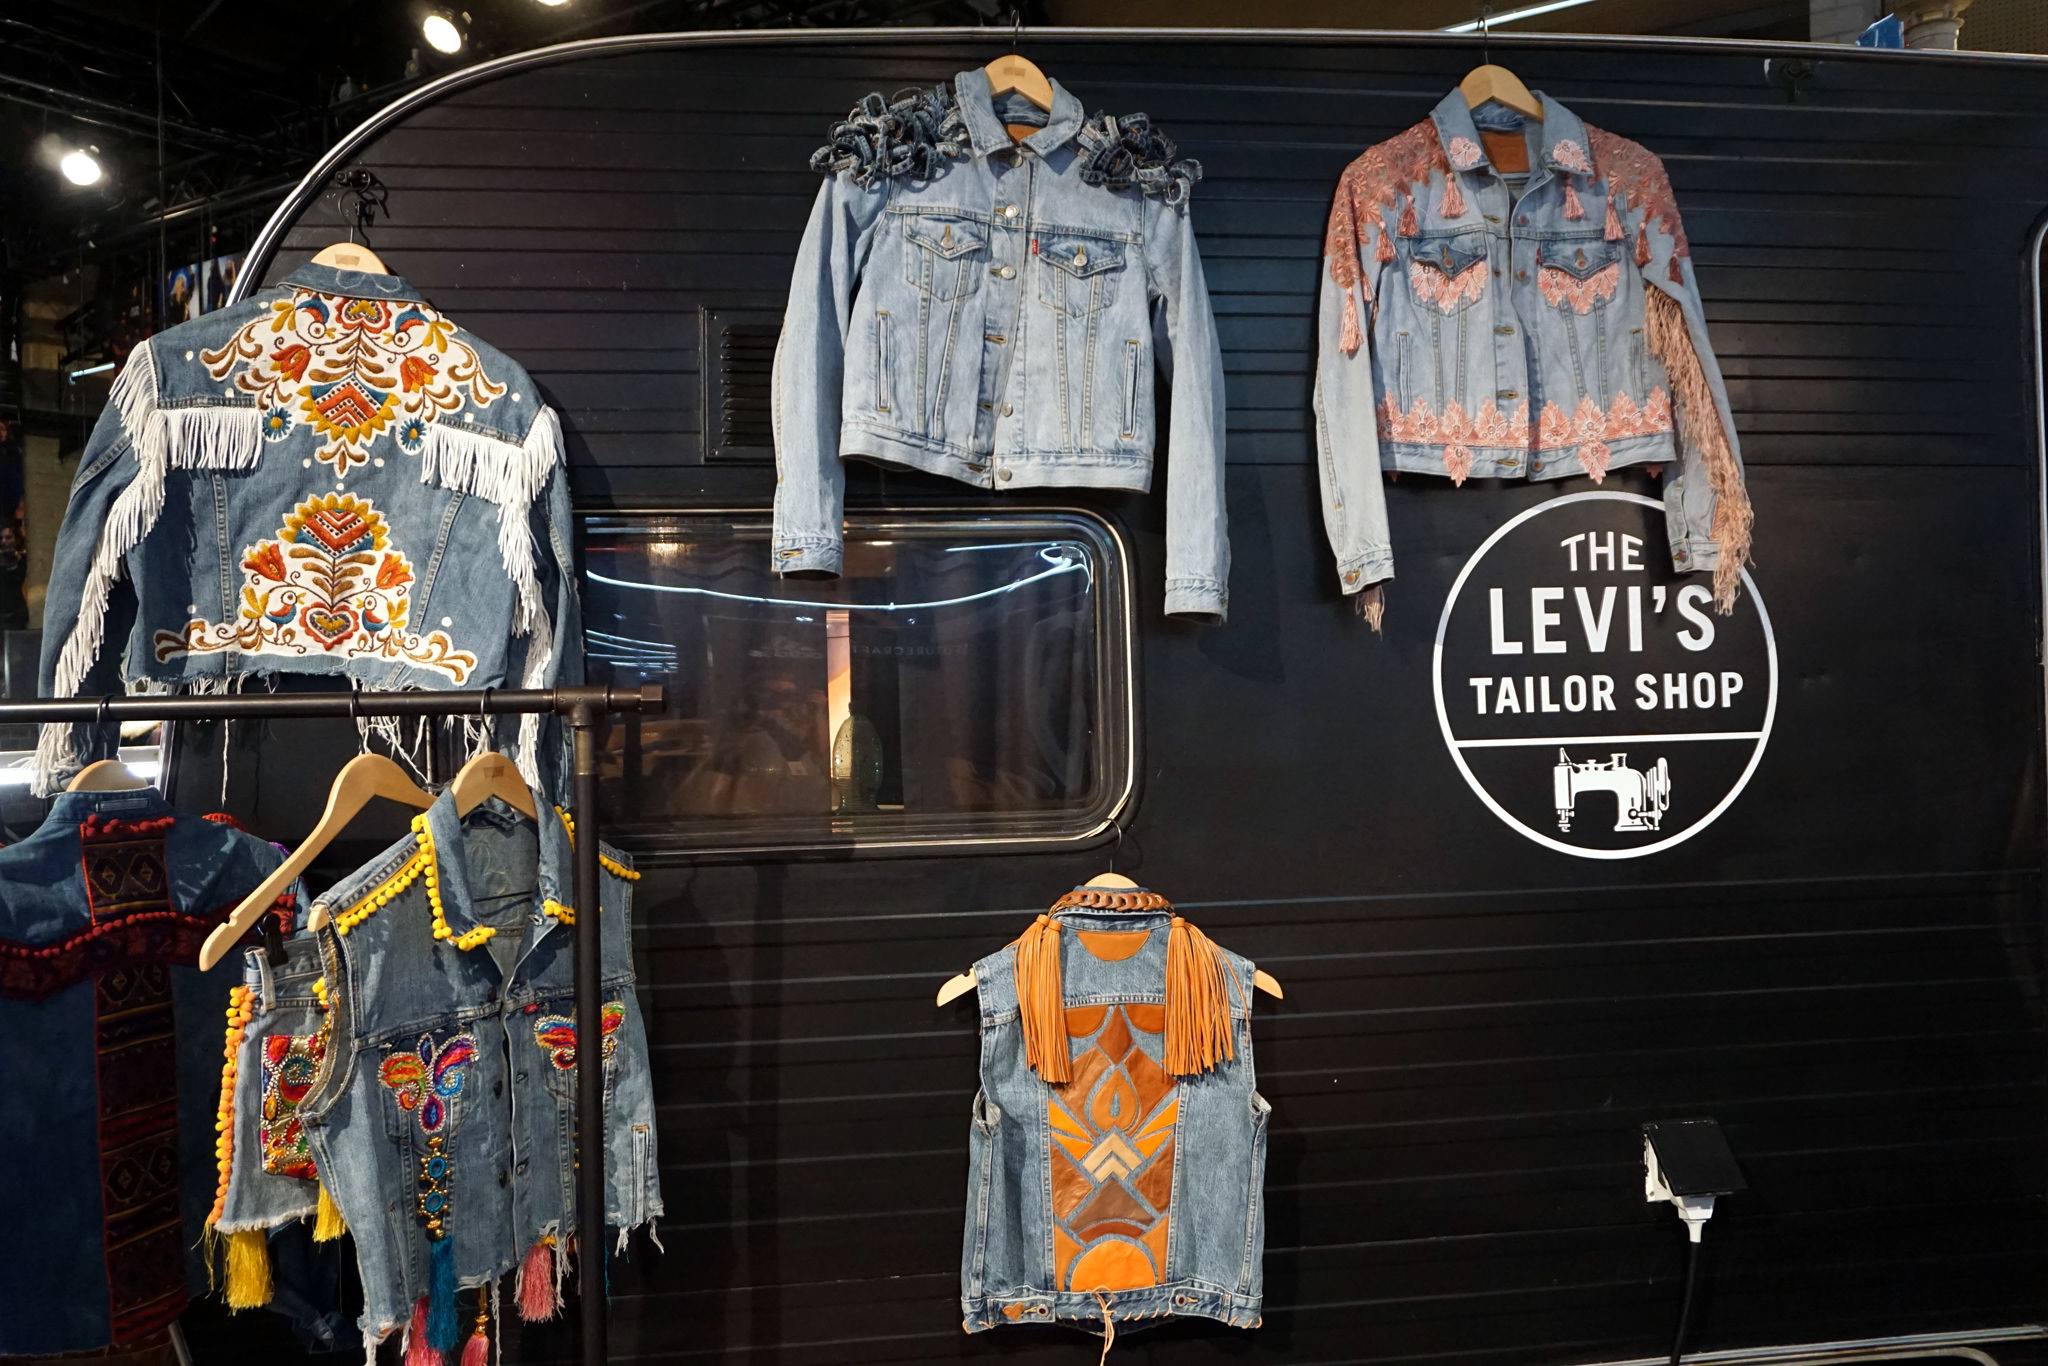 bread-and-butter-denim-jackets-in-levis-tailor-shop